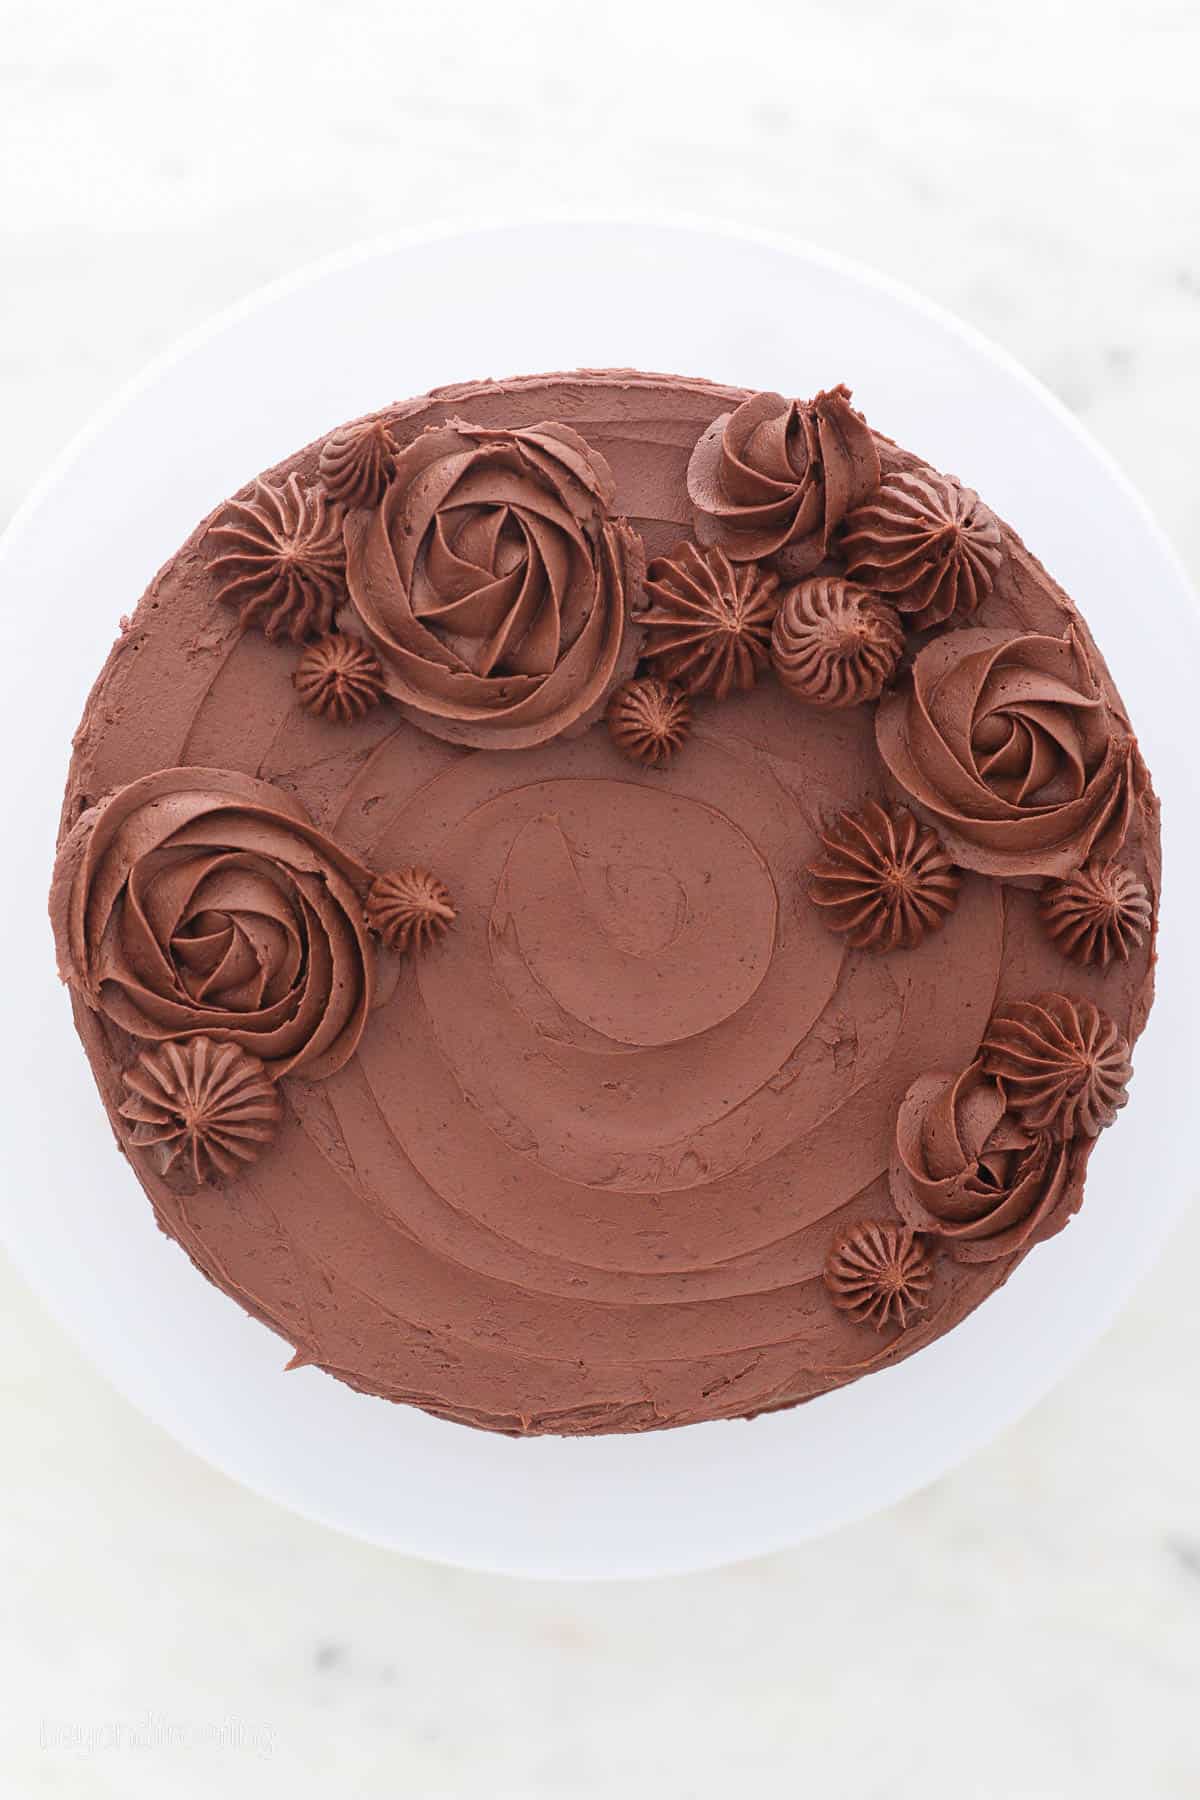 Overhead view of a frosted marble cake partially decorated with chocolate buttercream roses and smaller piped swirls.